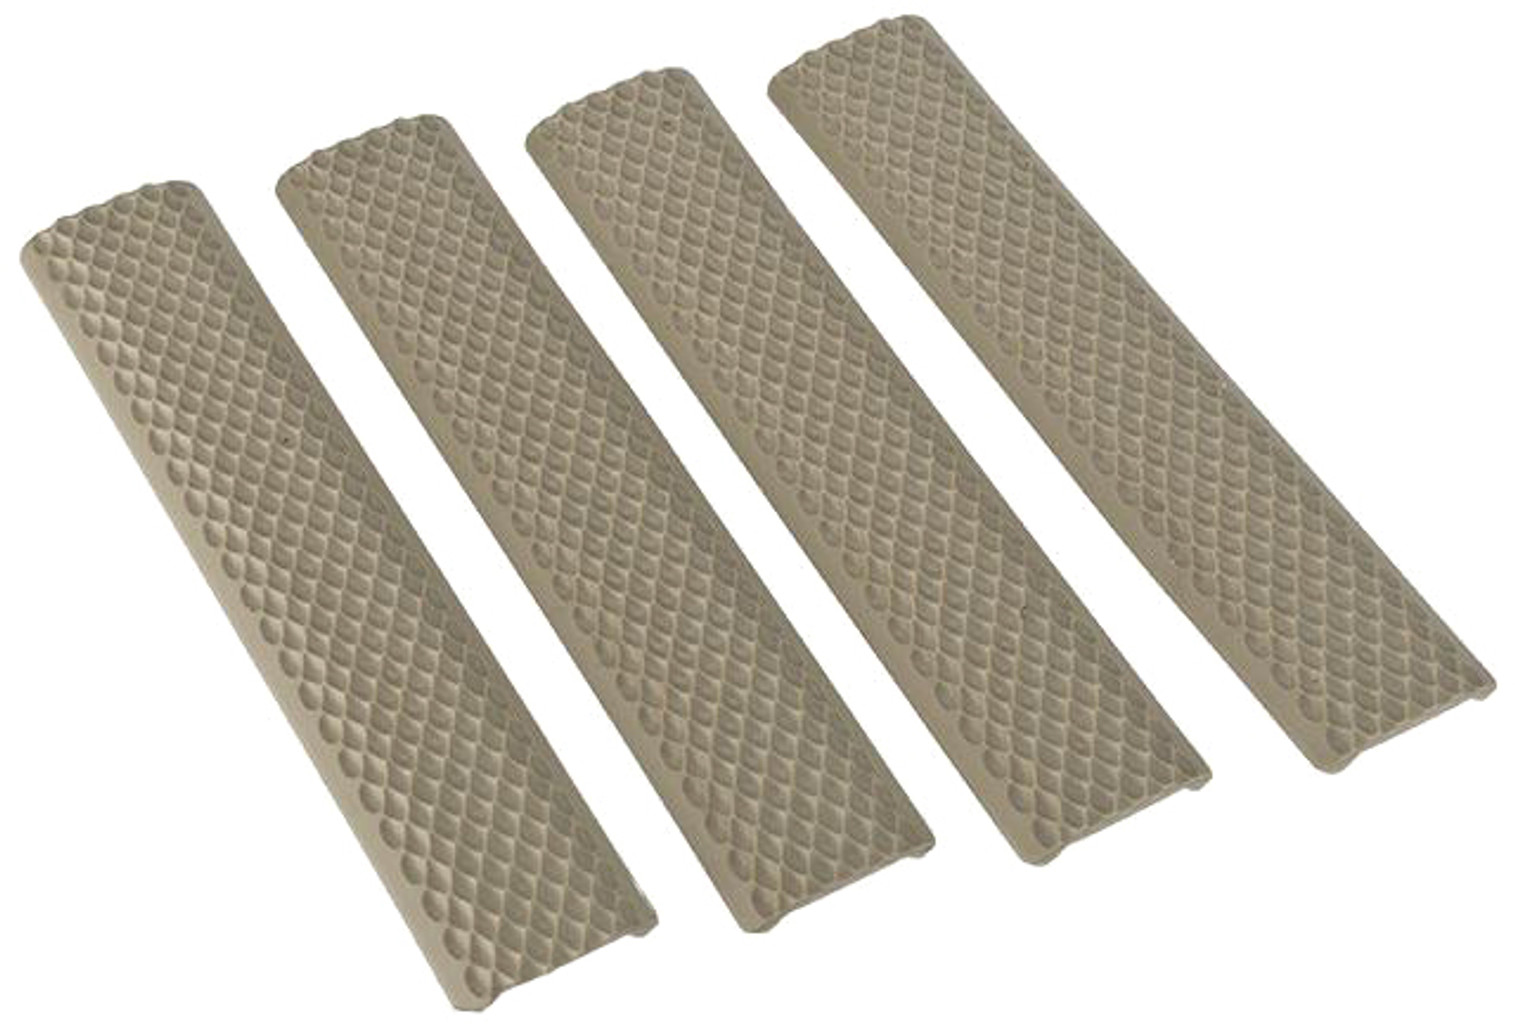 G&P Rubber "Golfball" Textured Keymod 6" Rail Covers - Set of 4(Color: Sand)